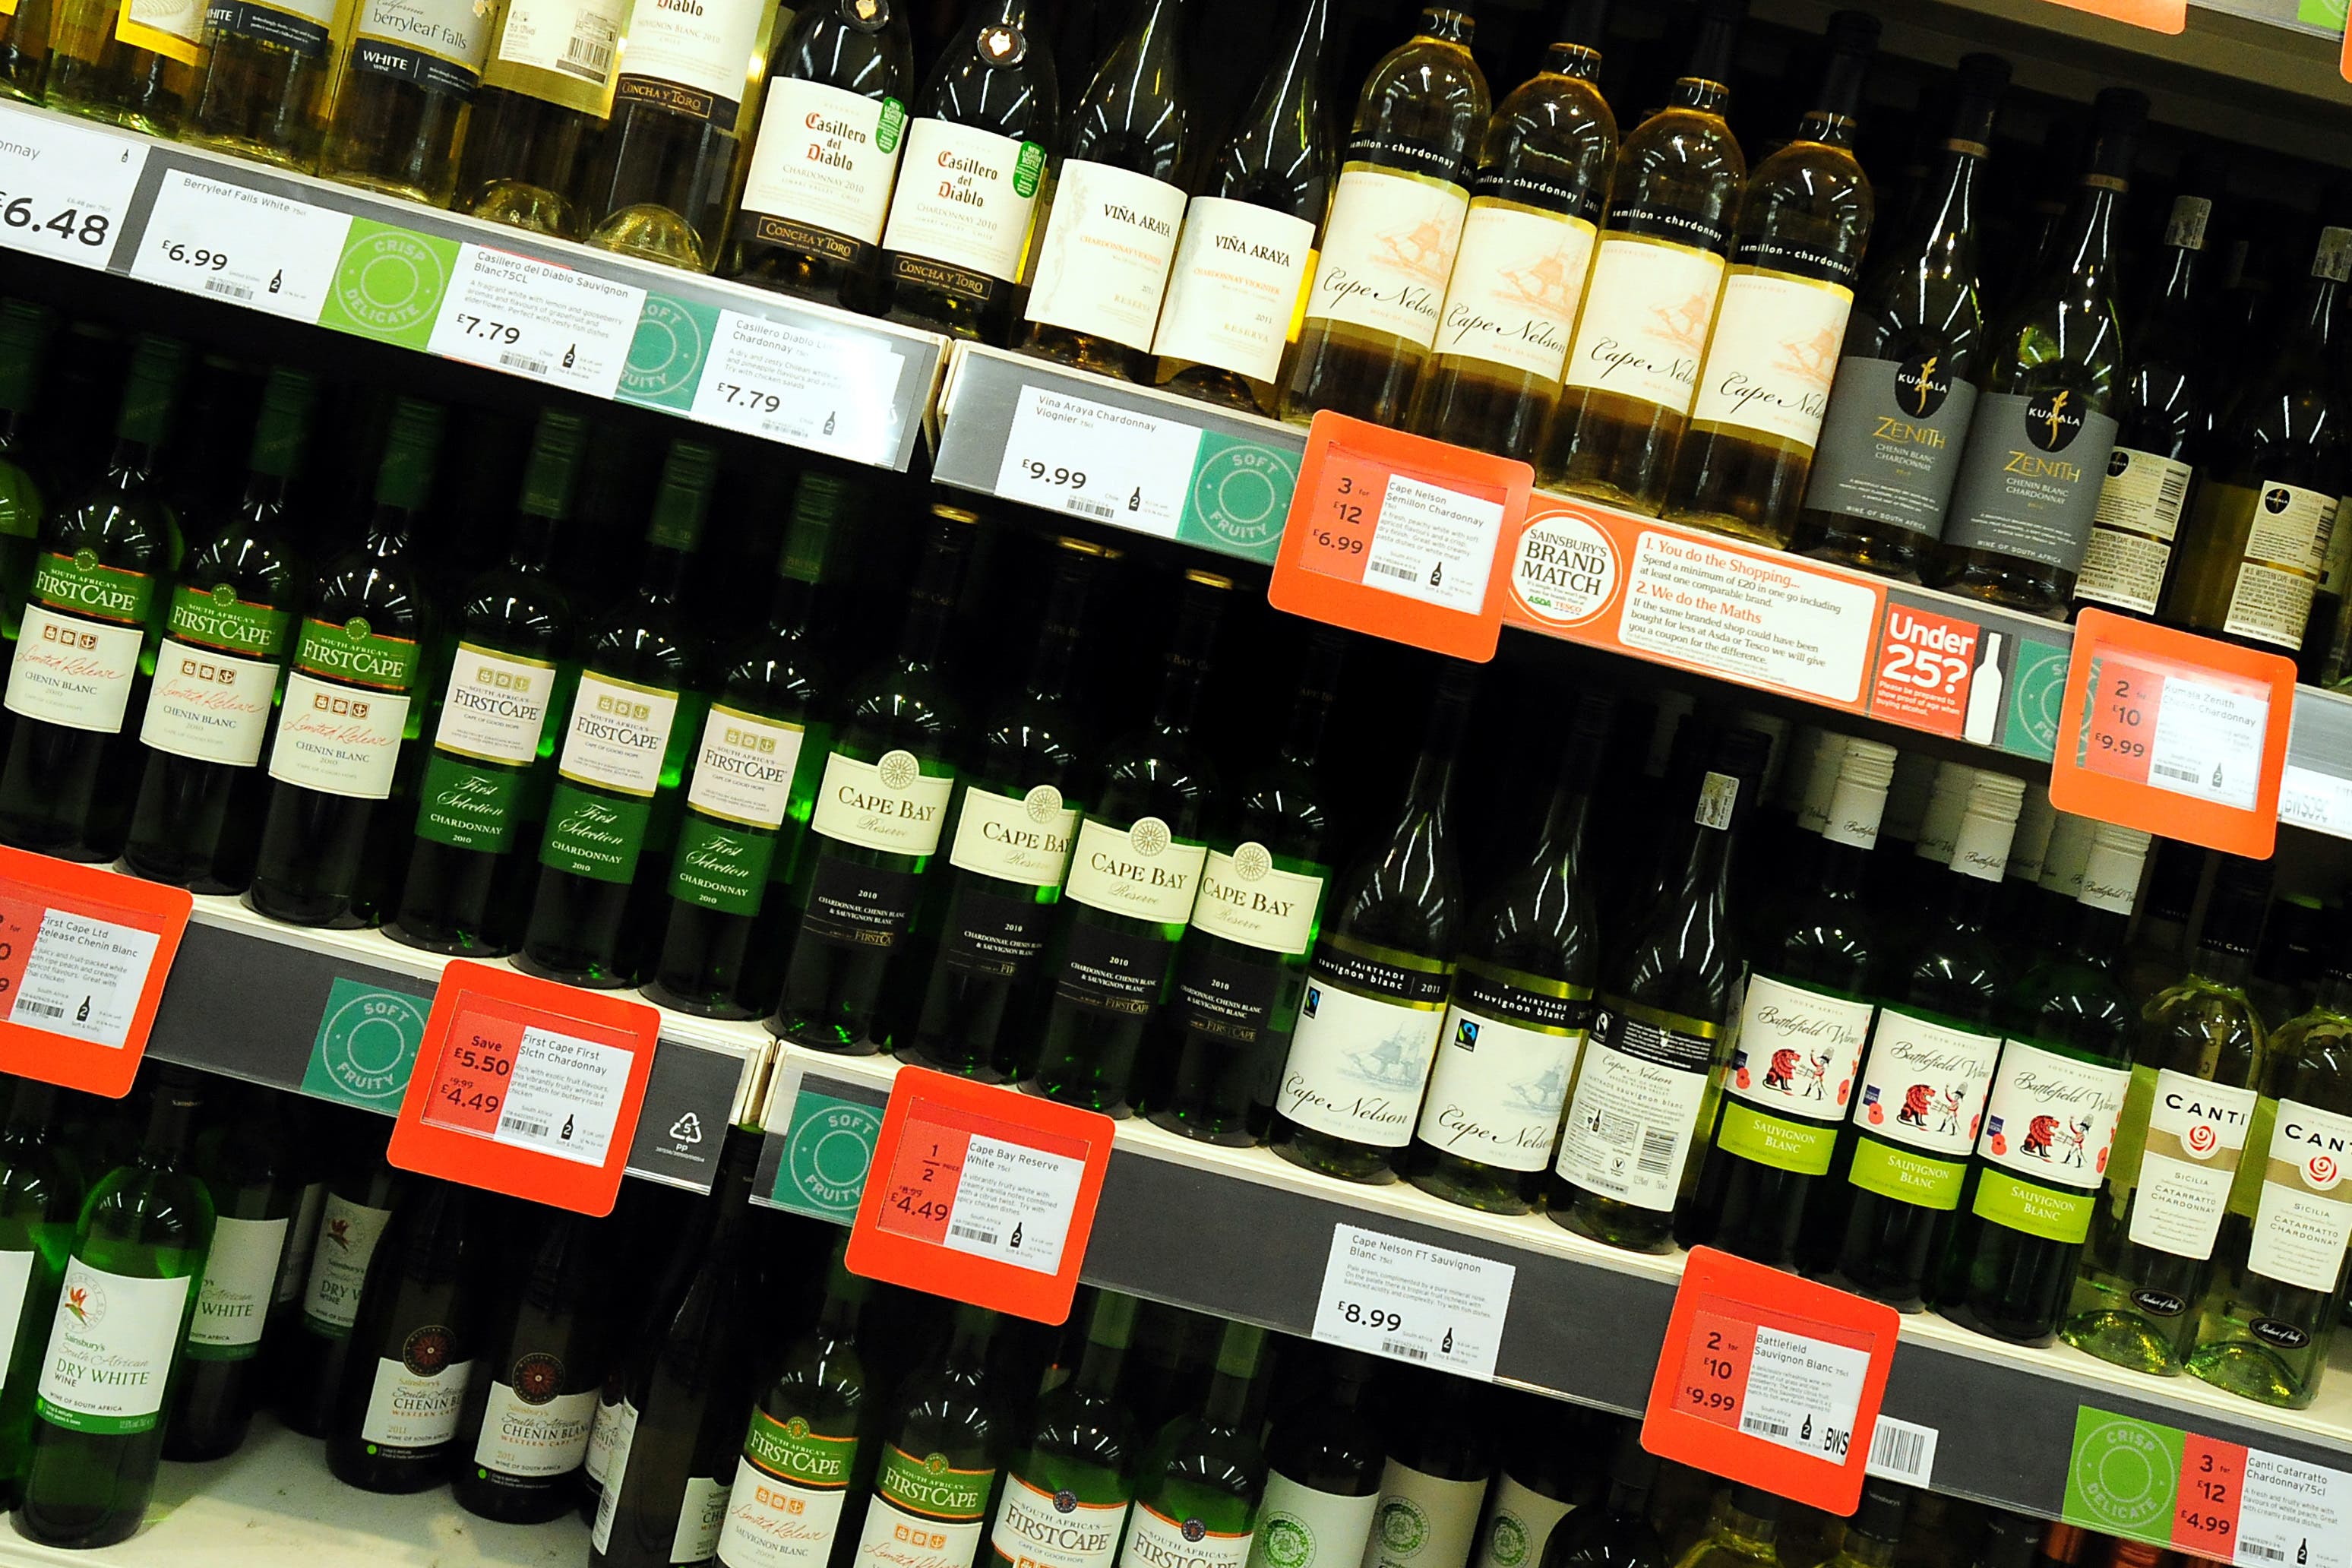 A general view of alcohol on the shelf at a supermarket in Burton-on-Trent.